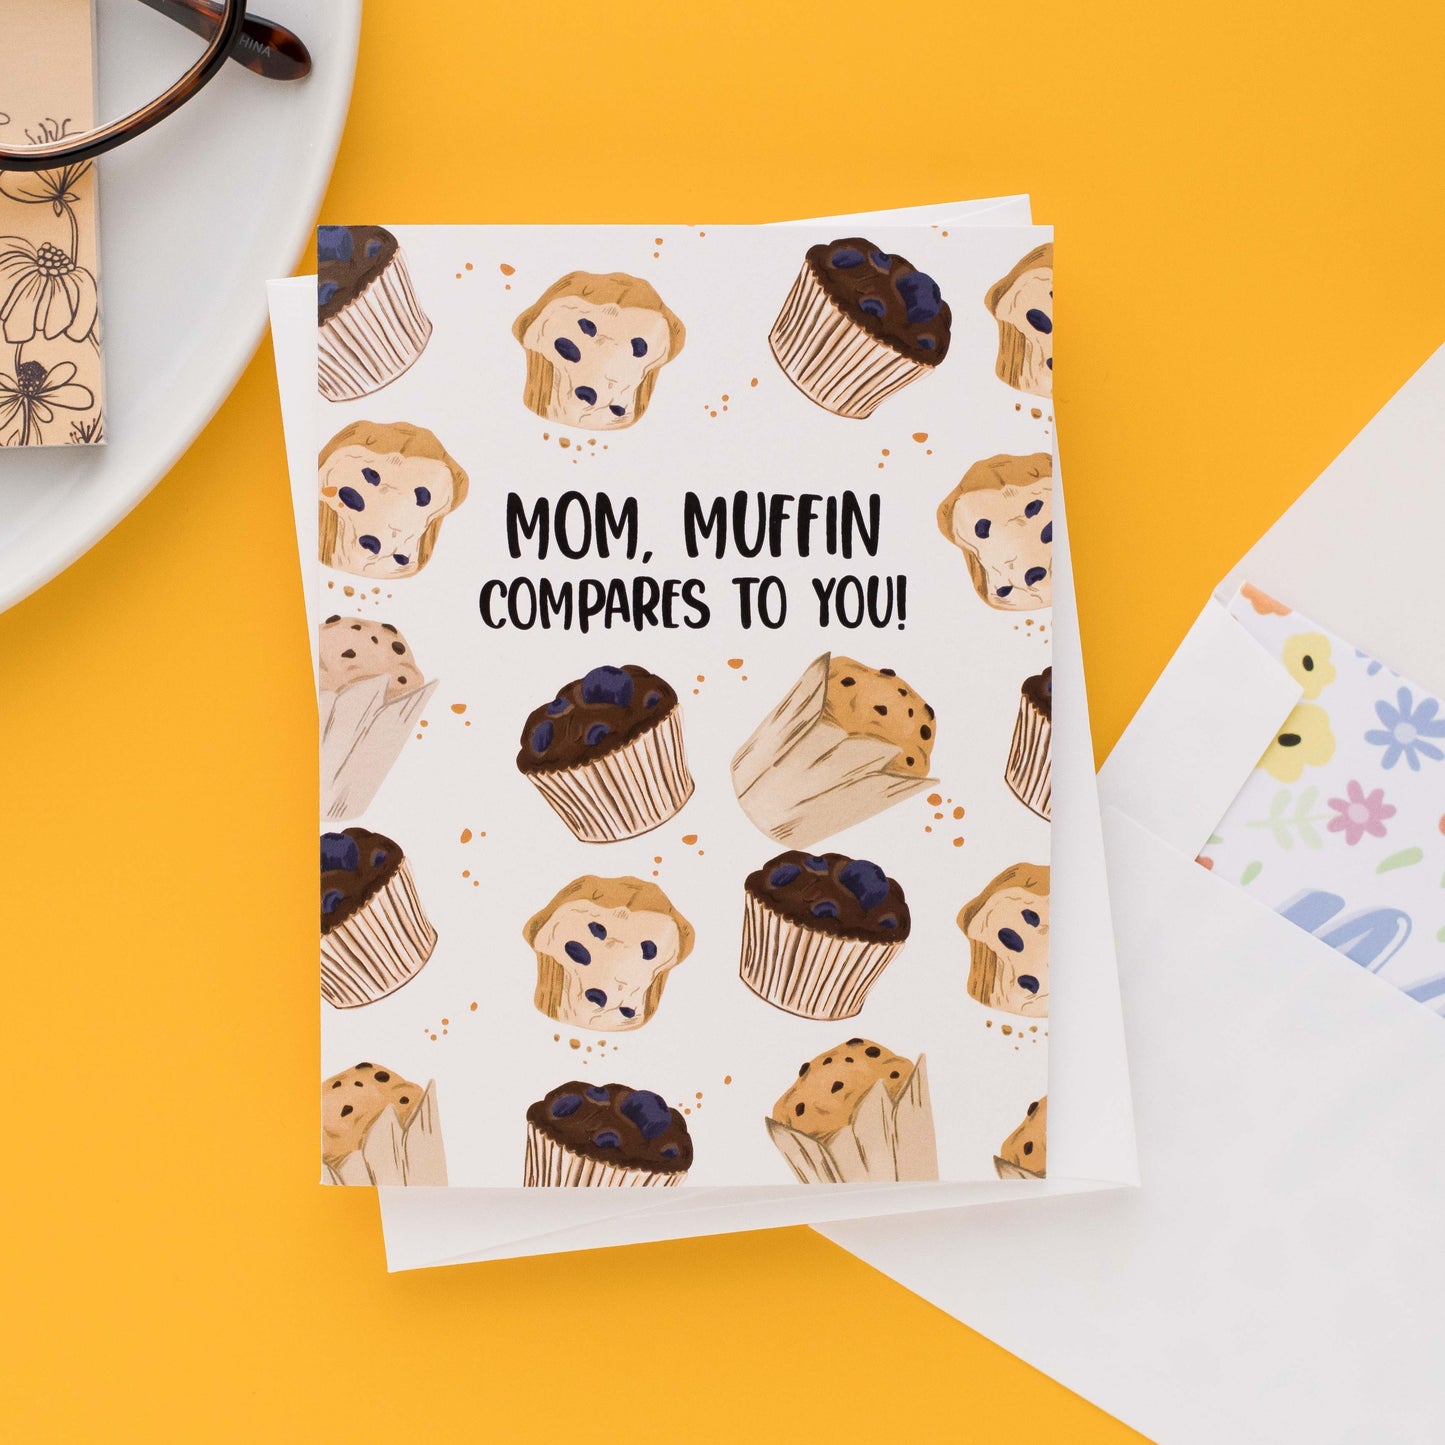 Mom, Muffin Compares To You! - Greeting Card